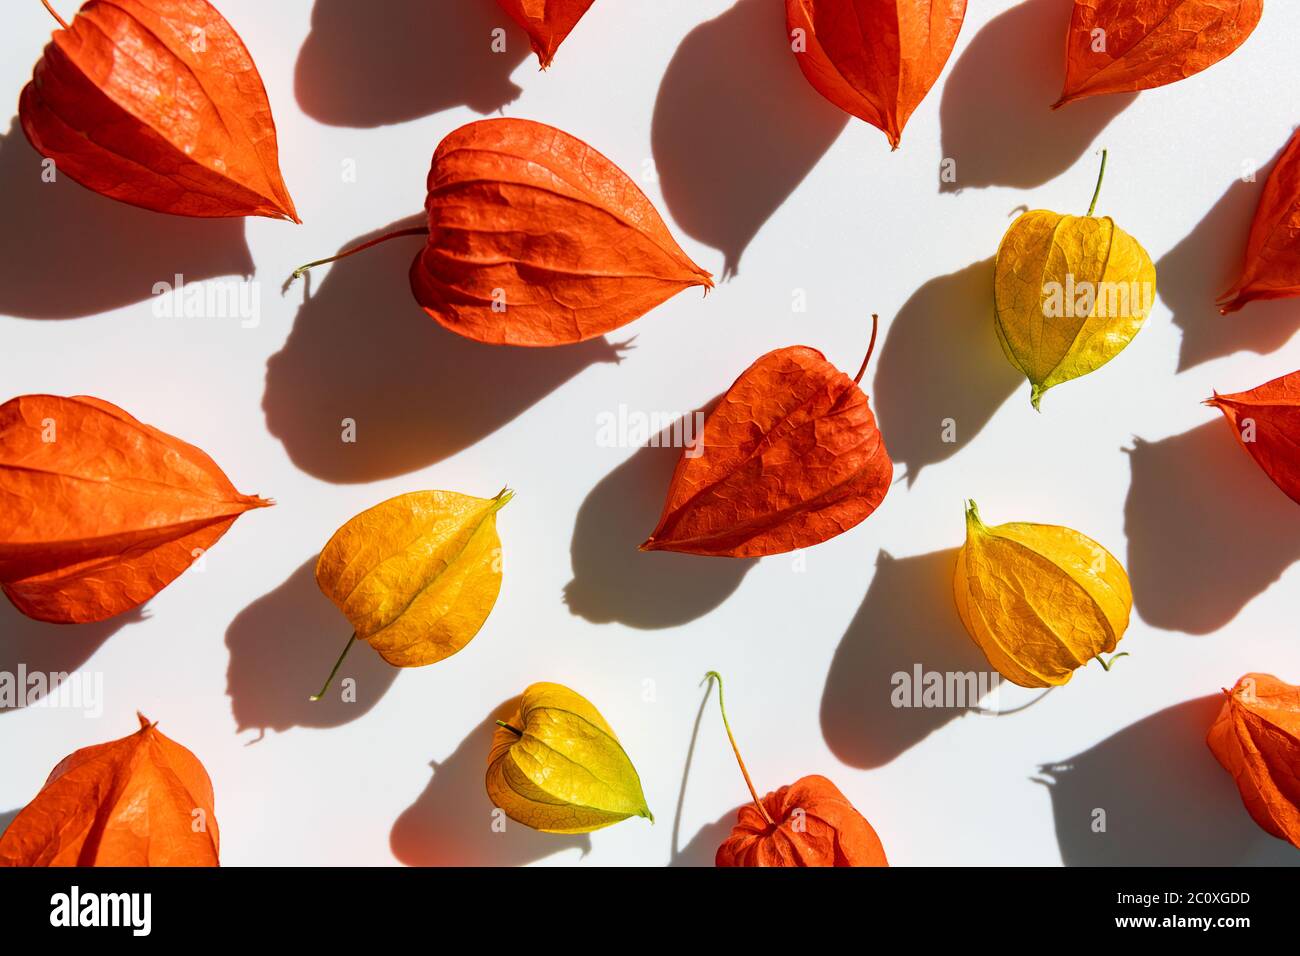 Autumn background. Flat lay of orange and yellow dry physalis flowers in the sunlight on white background Stock Photo